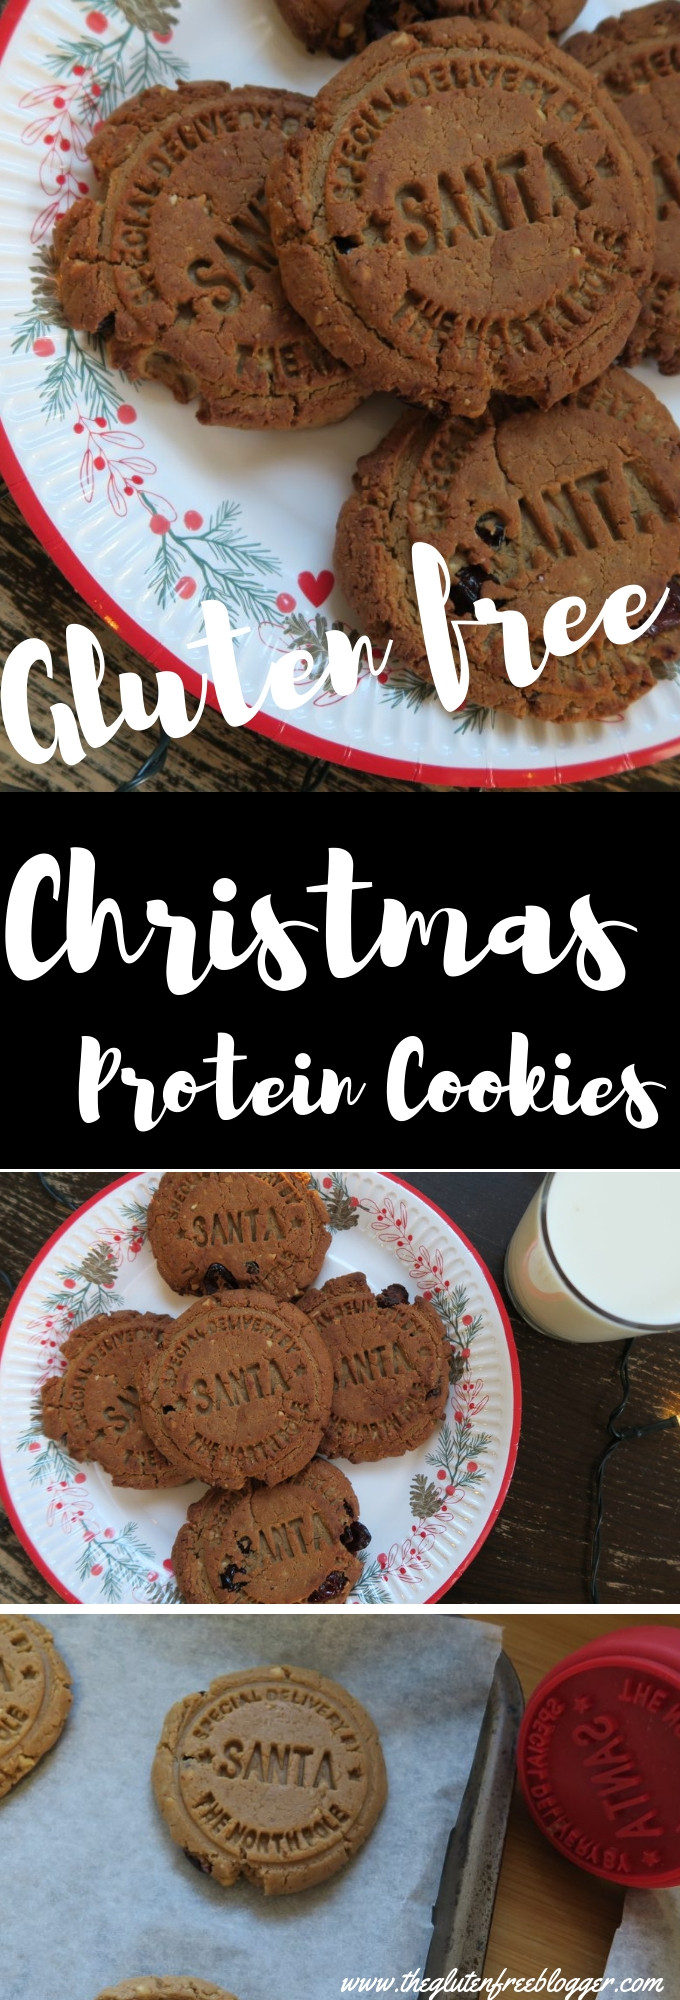 Dairy Free Christmas Cookies
 Gluten and dairy free Christmas spiced protein cookies